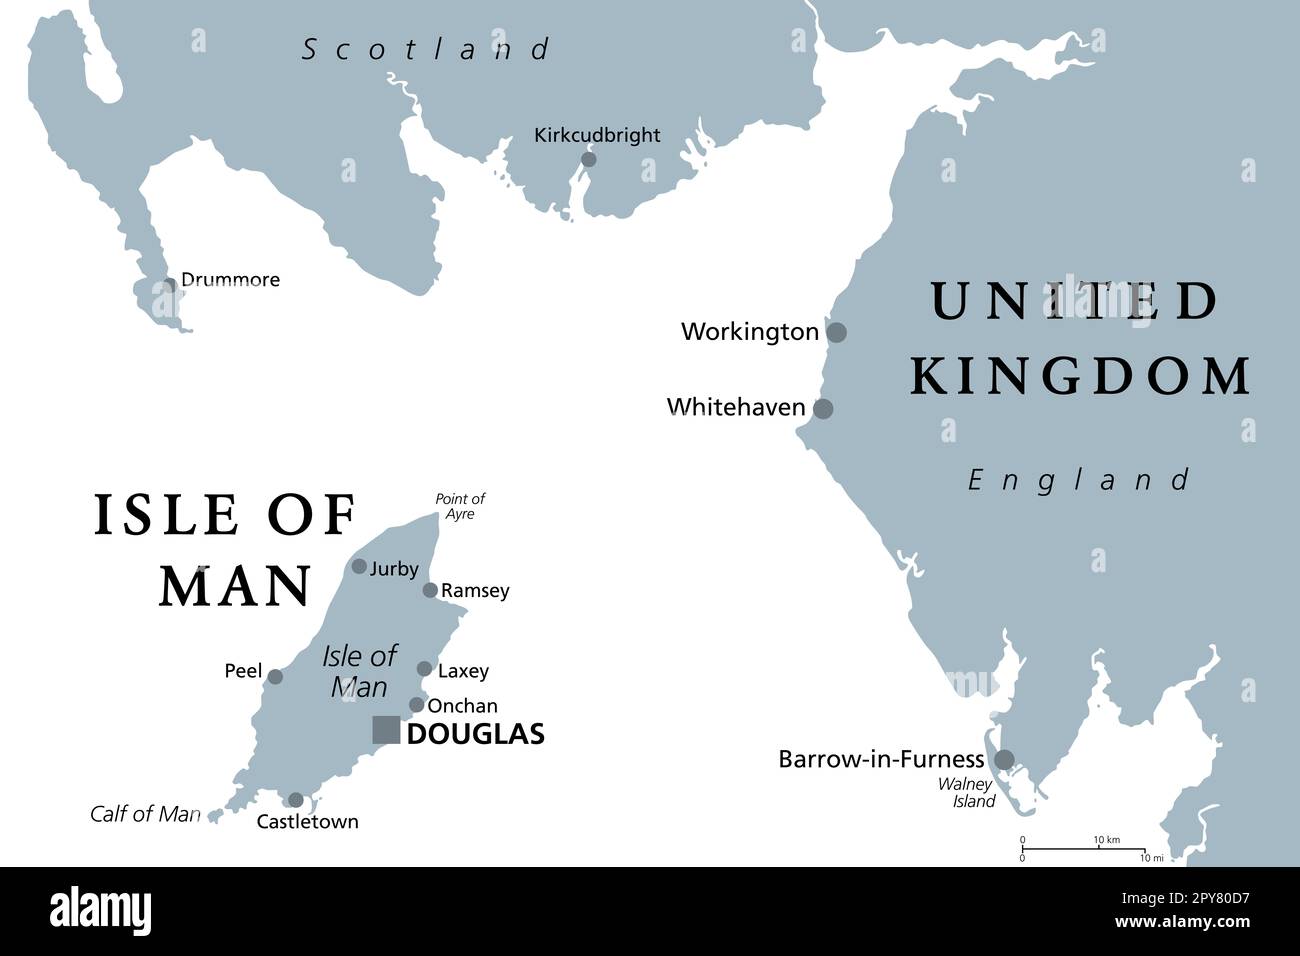 Isle of Man, also known as Mann, gray political map. An island nation and British Crown Dependency in the Irish Sea, between Great Britain and Ireland. Stock Photo